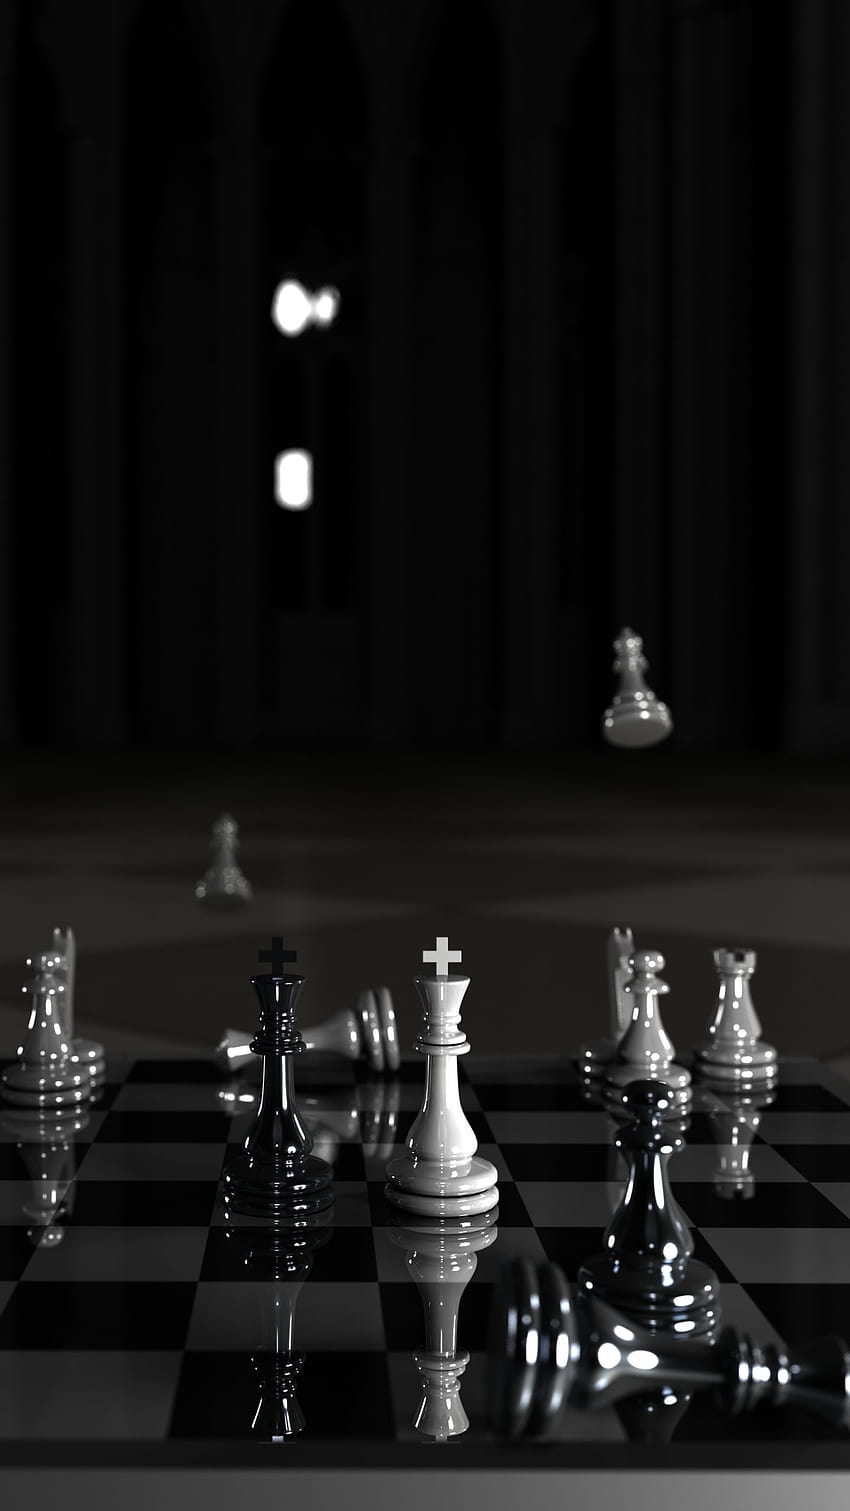 Chess old mobile, cell phone, smartphone wallpapers hd, desktop backgrounds  240x320, images and pictures